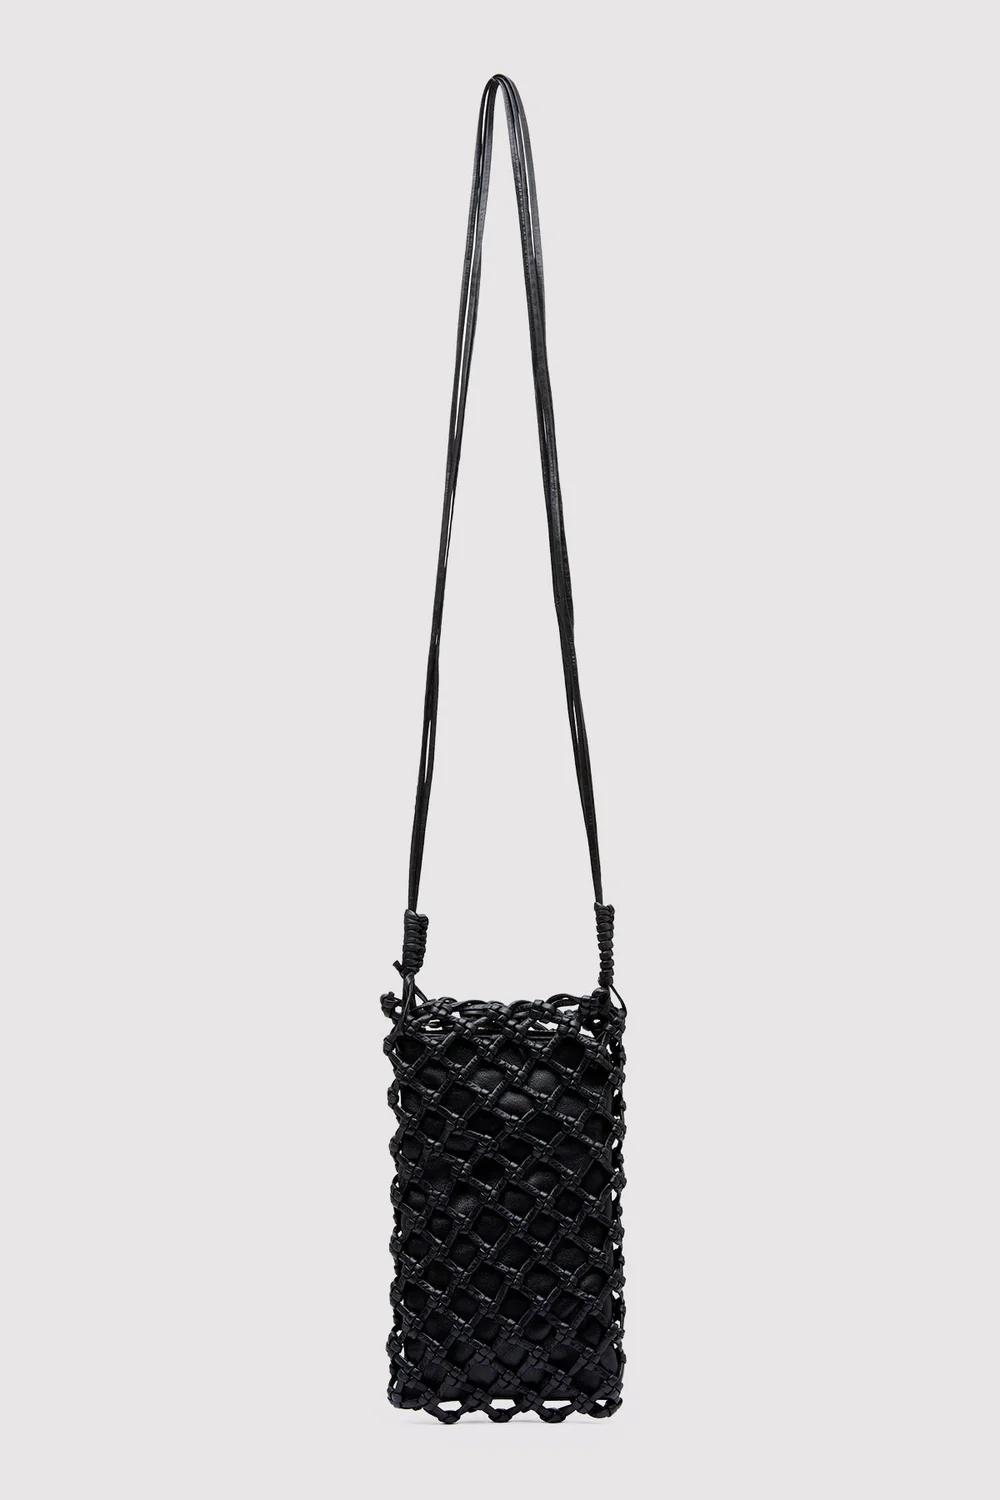 Product Image for Macrame Sling Pouch, Black